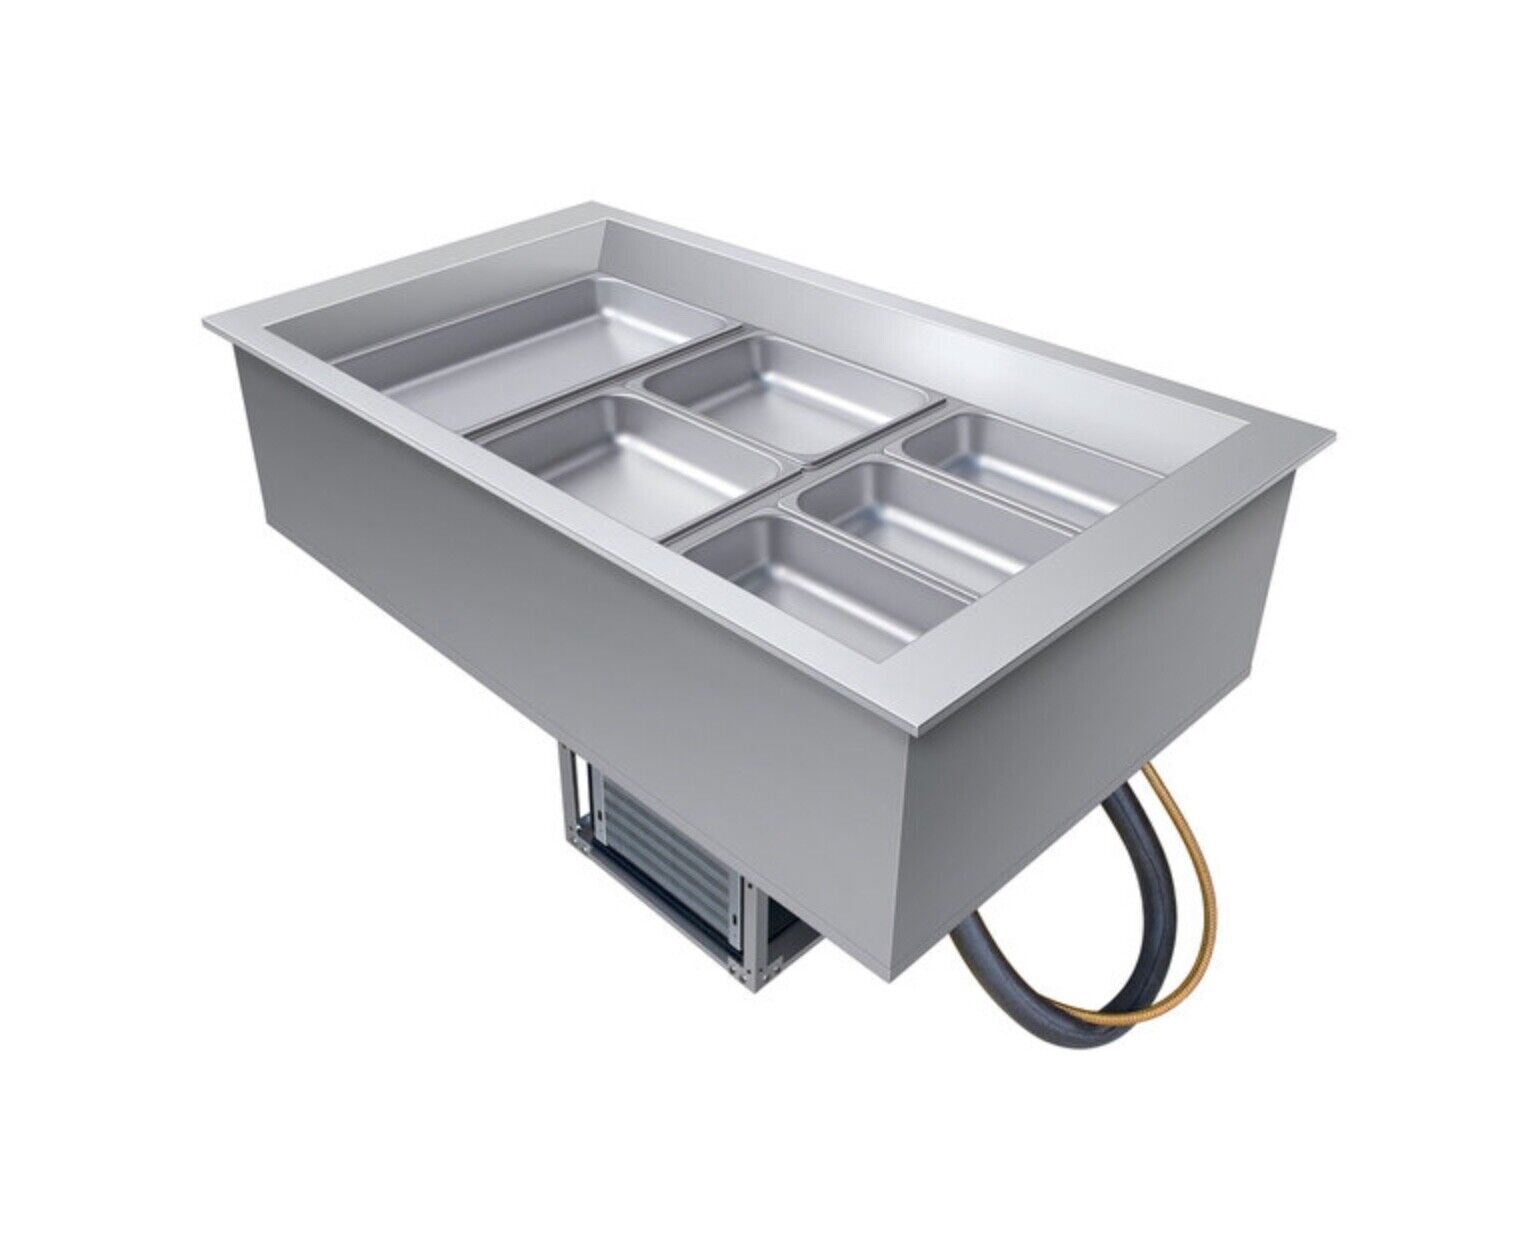 Hatco Cwb-3 Three Pan Refrigerated Drop In Cold Food Well With Drain - 120v